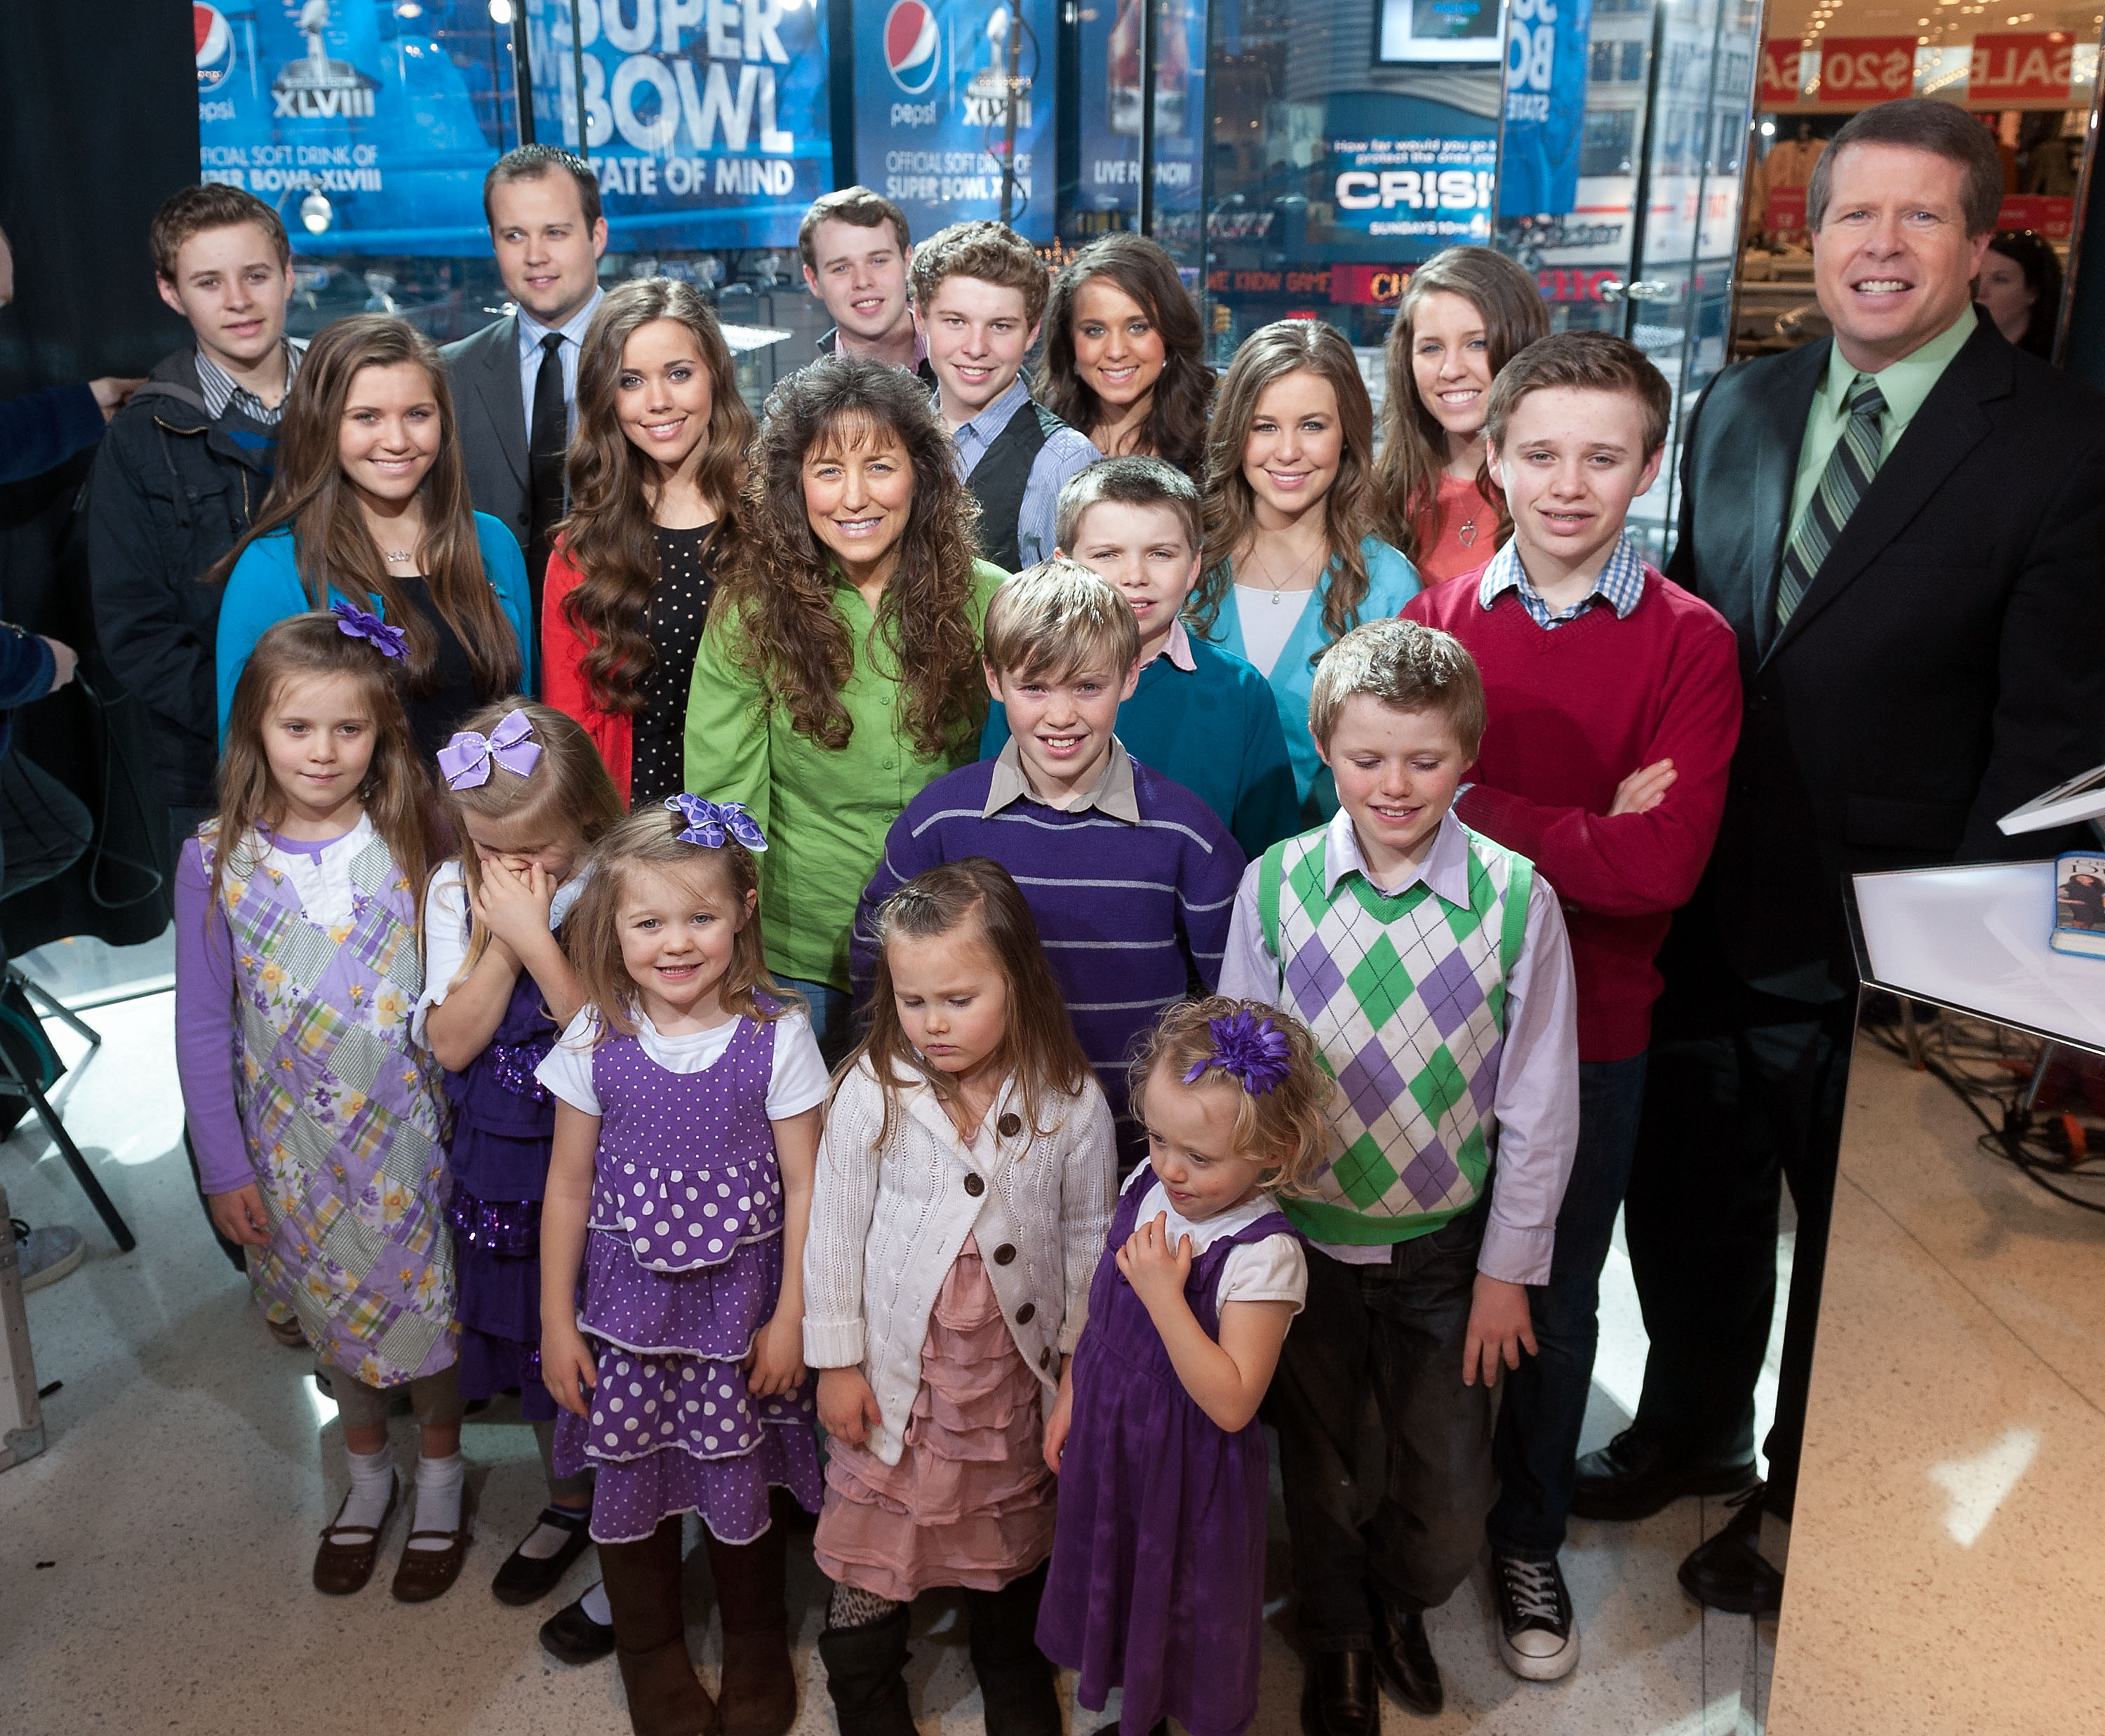 The Duggar family from TLC"s 'Counting On' standing together on the set of 'Extra' and smiling at the camera